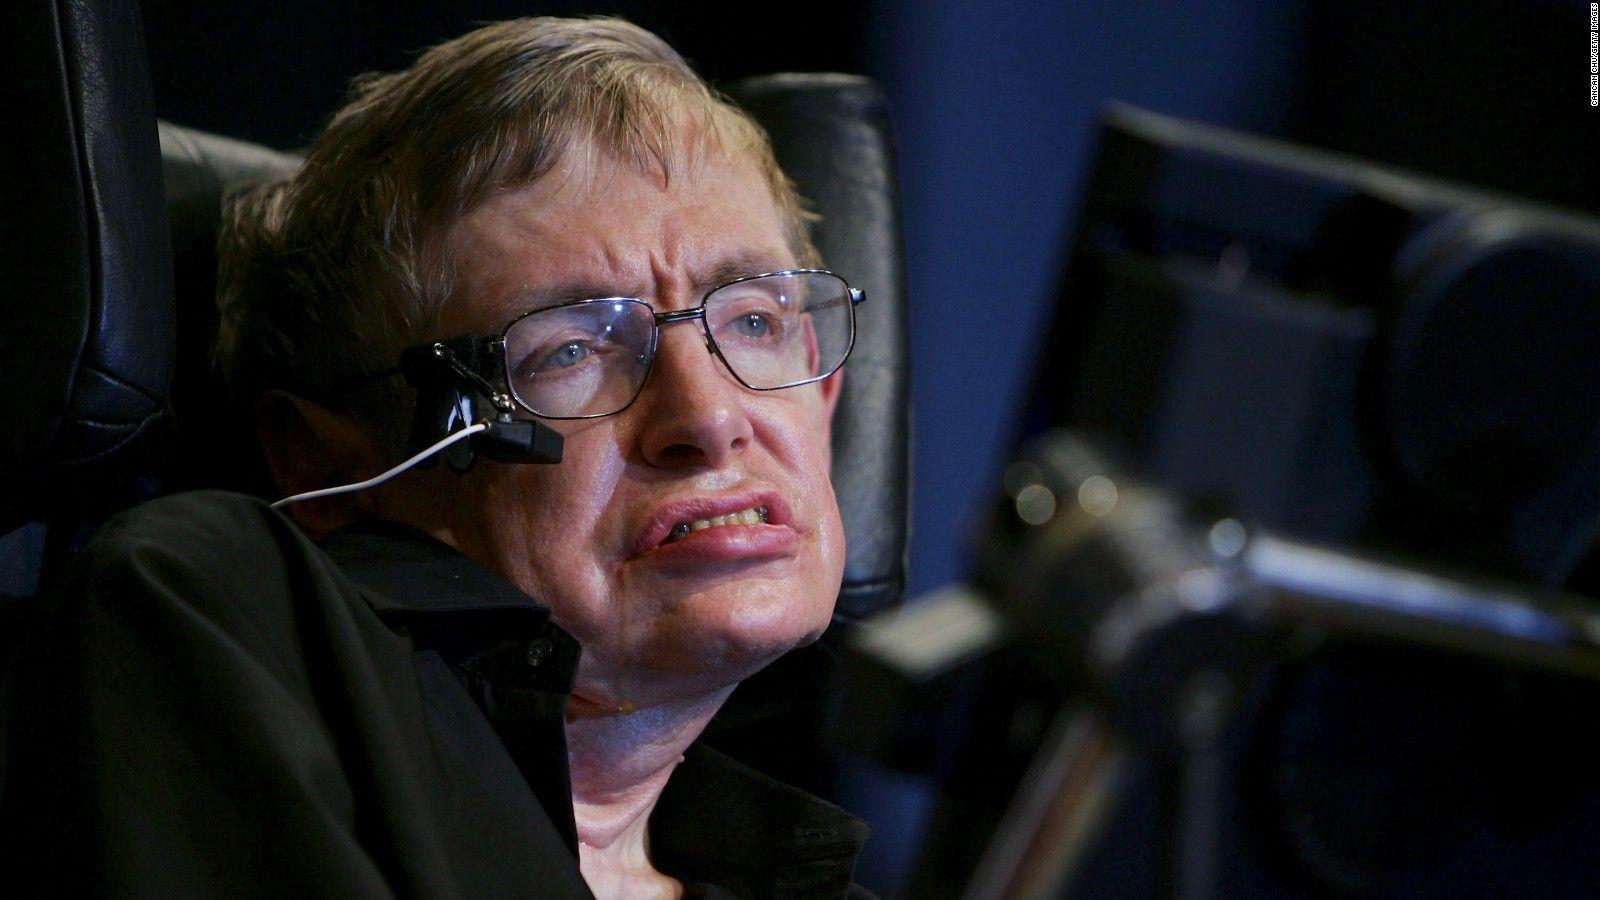 Stephen Hawking's giving us all about 000 years to find a new